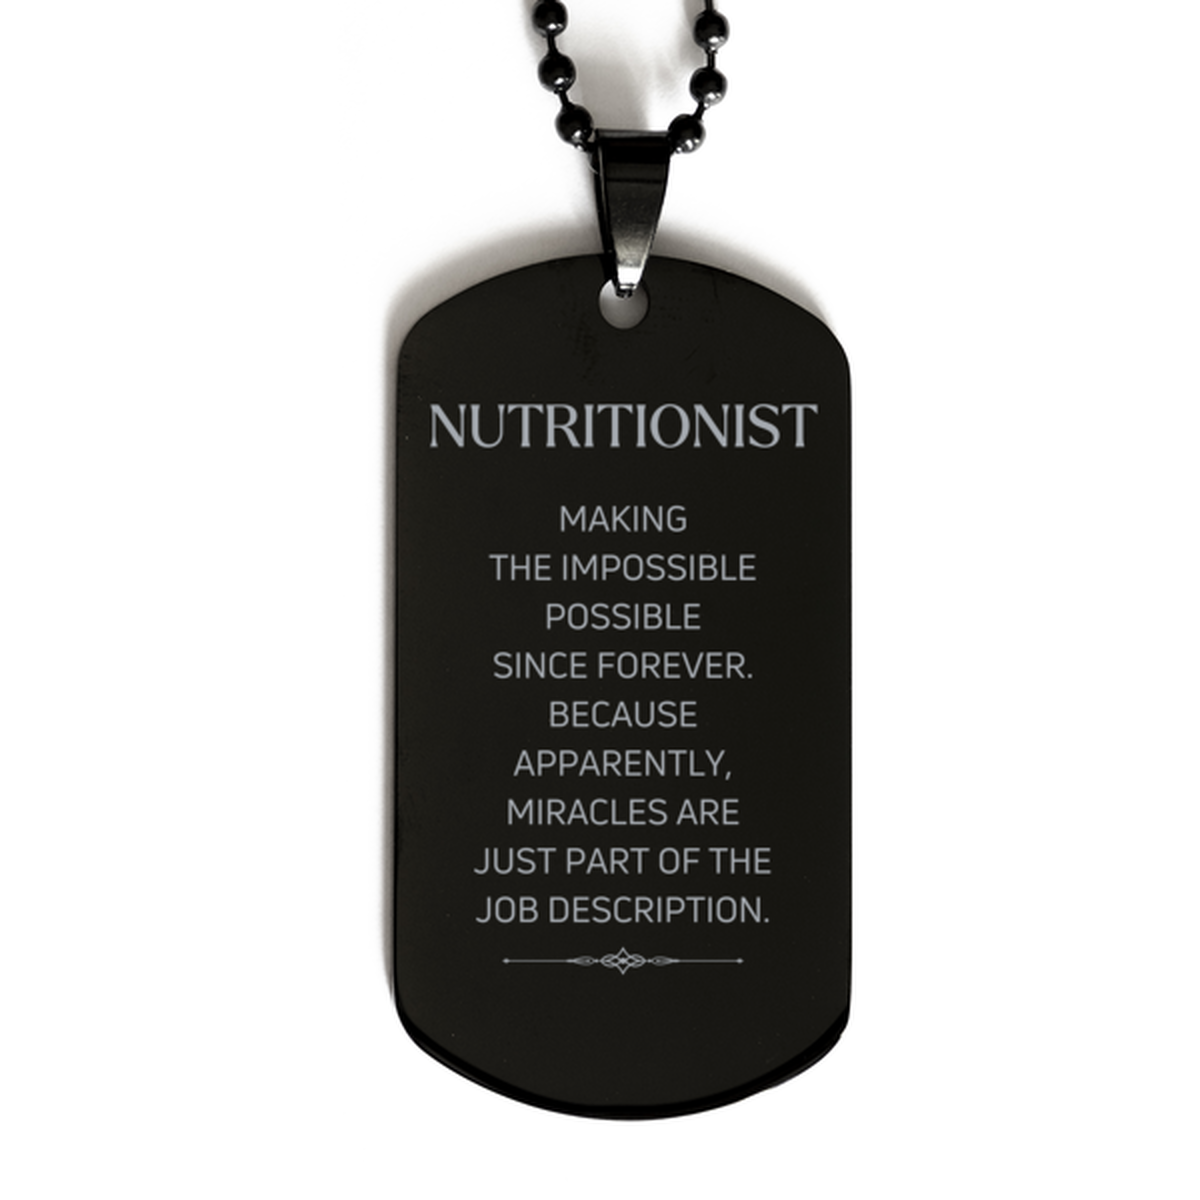 Funny Nutritionist Gifts, Miracles are just part of the job description, Inspirational Birthday Black Dog Tag For Nutritionist, Men, Women, Coworkers, Friends, Boss